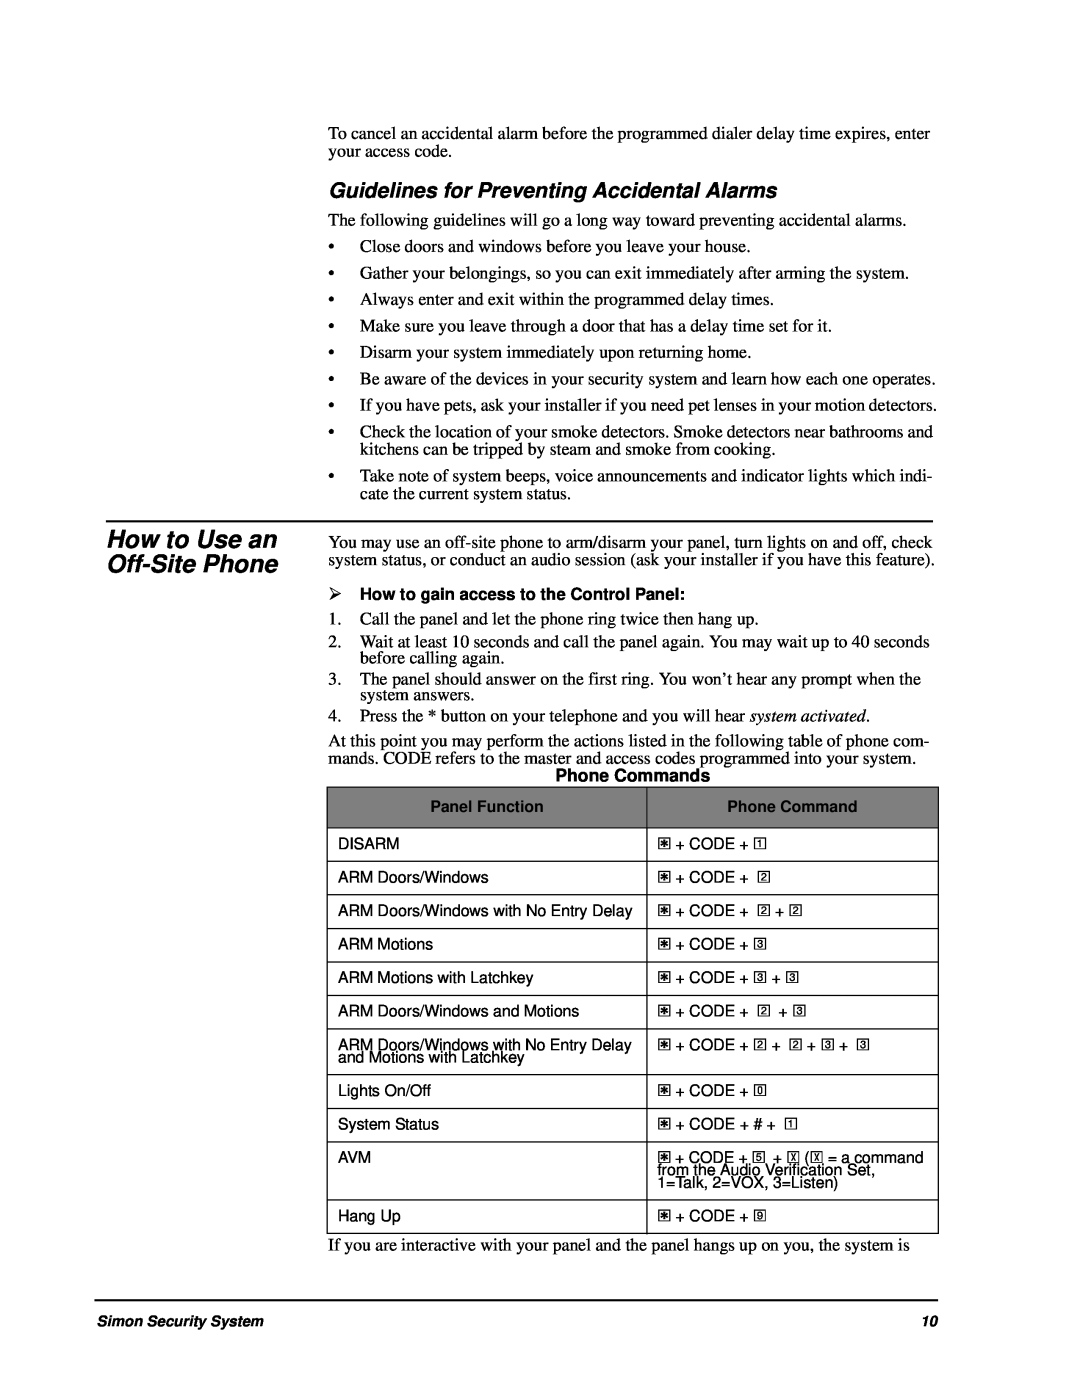 GE 60-875 manual How to Use an Off-SitePhone, Guidelines for Preventing Accidental Alarms, Phone Commands 